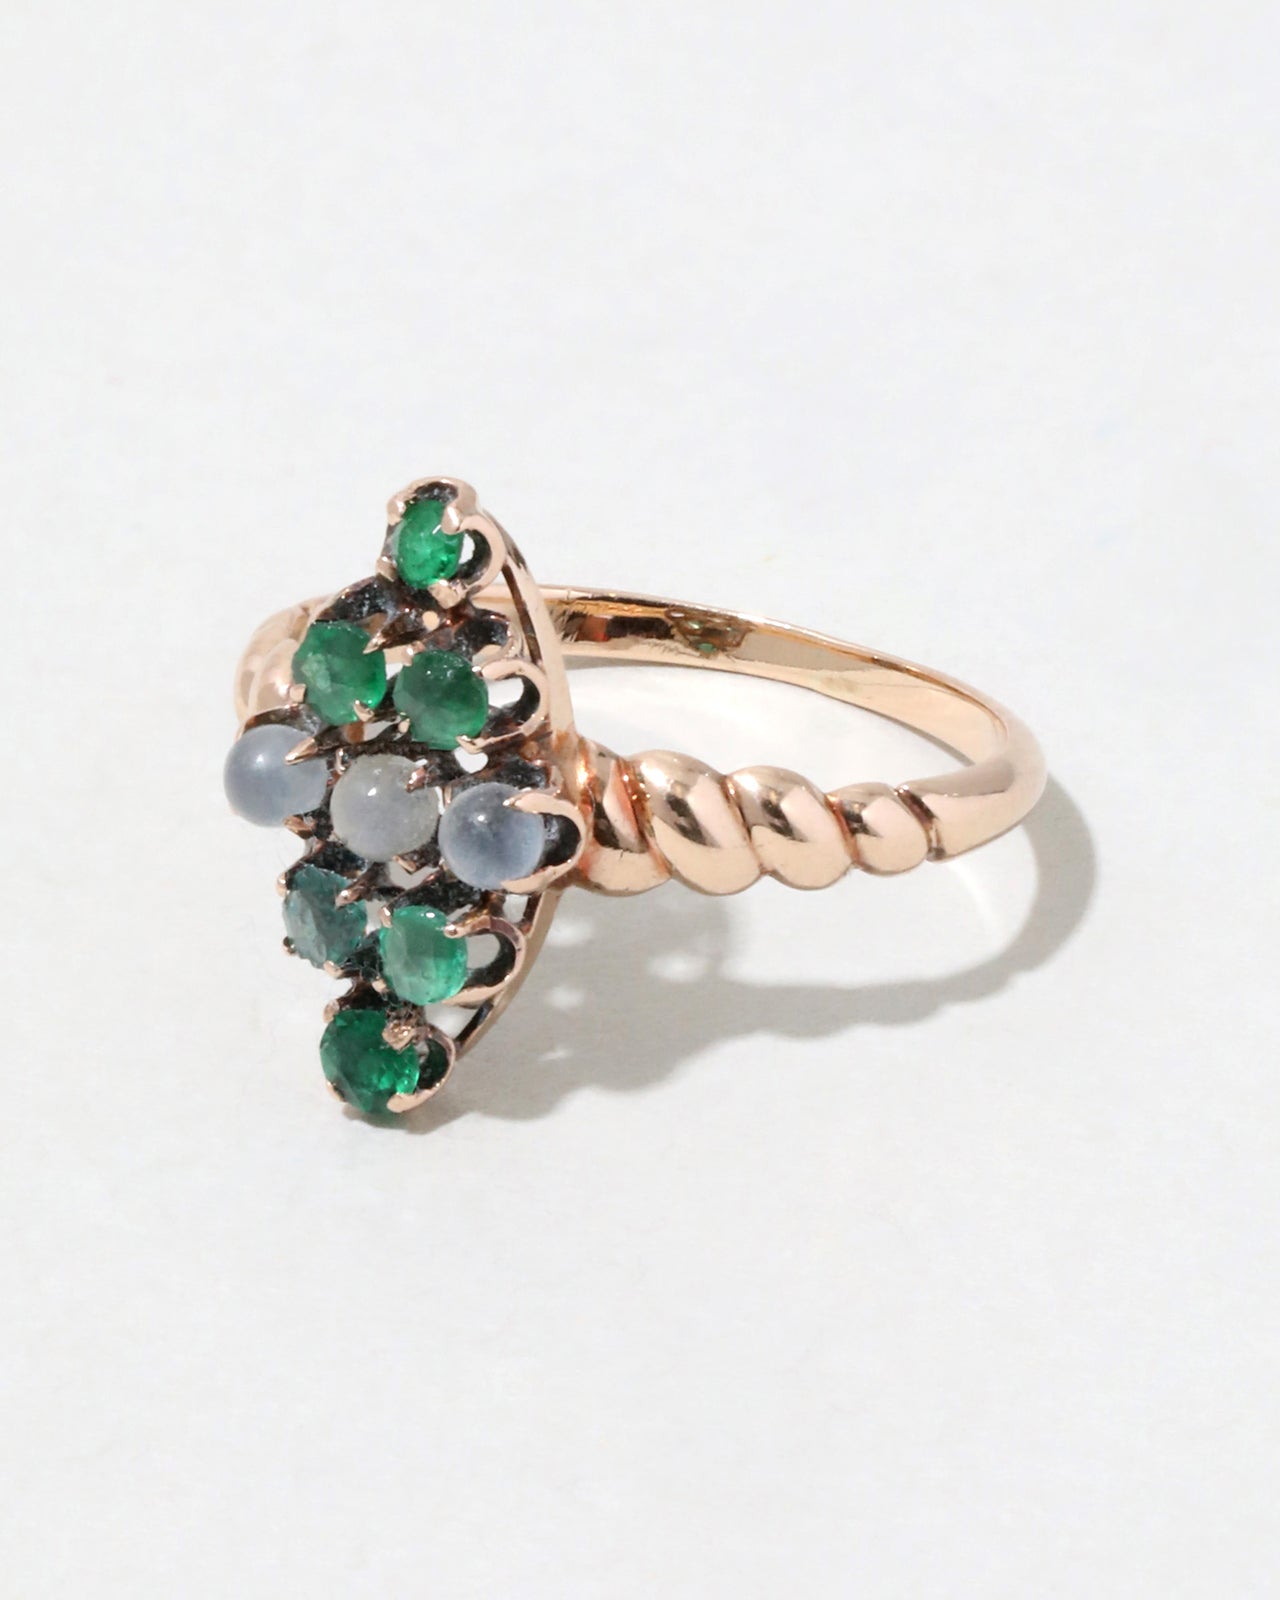 Antique 1880s Victorian 10k Rose Gold Emerald and Moonstone Marquise Ring - Photo 2